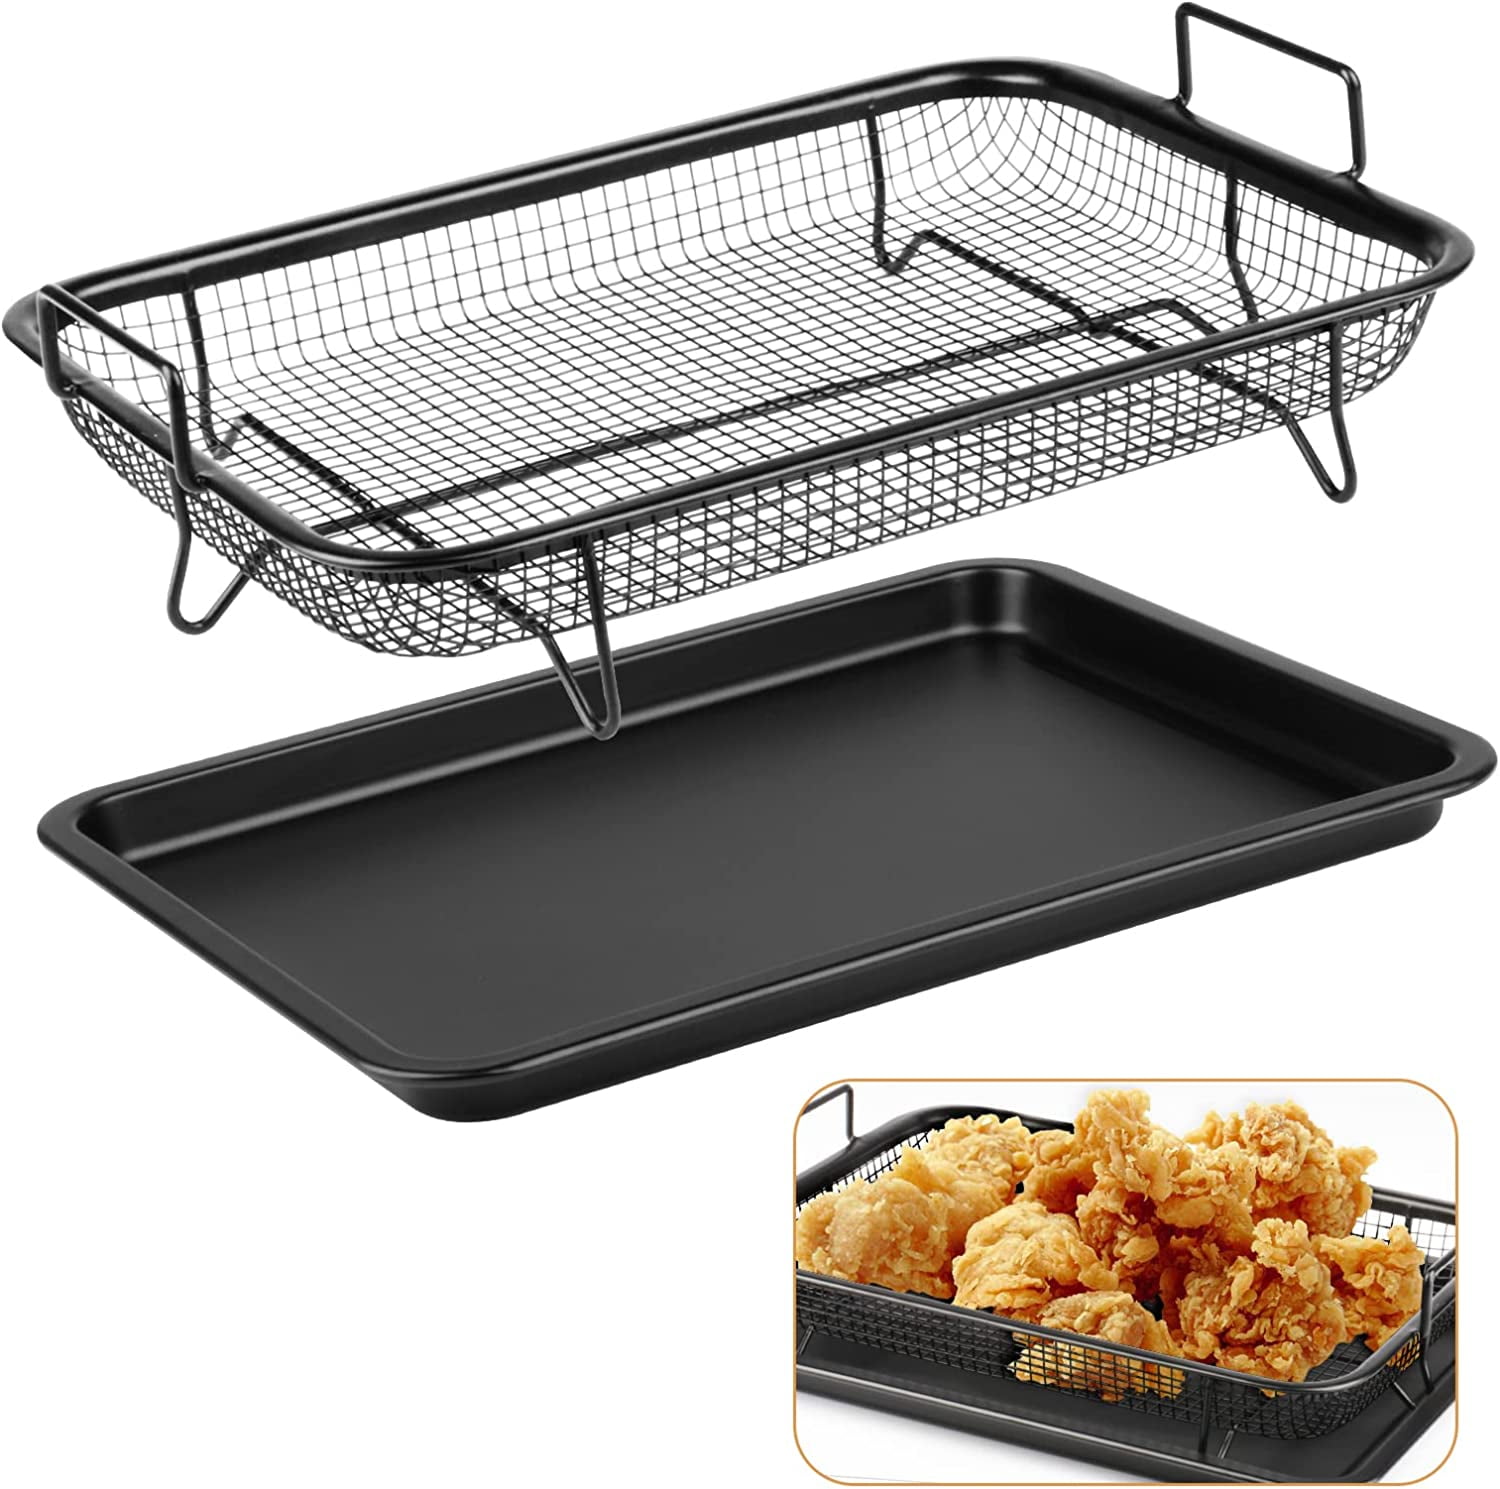 Air Fryer Basket For Oven, Stainless Steel Air Fryer Tray, 12.2 X 9.1  Non-stick Mesh Basket, Oven Air Fryer Basket Wire Rack Roasting Basket, Today's Best Daily Deals